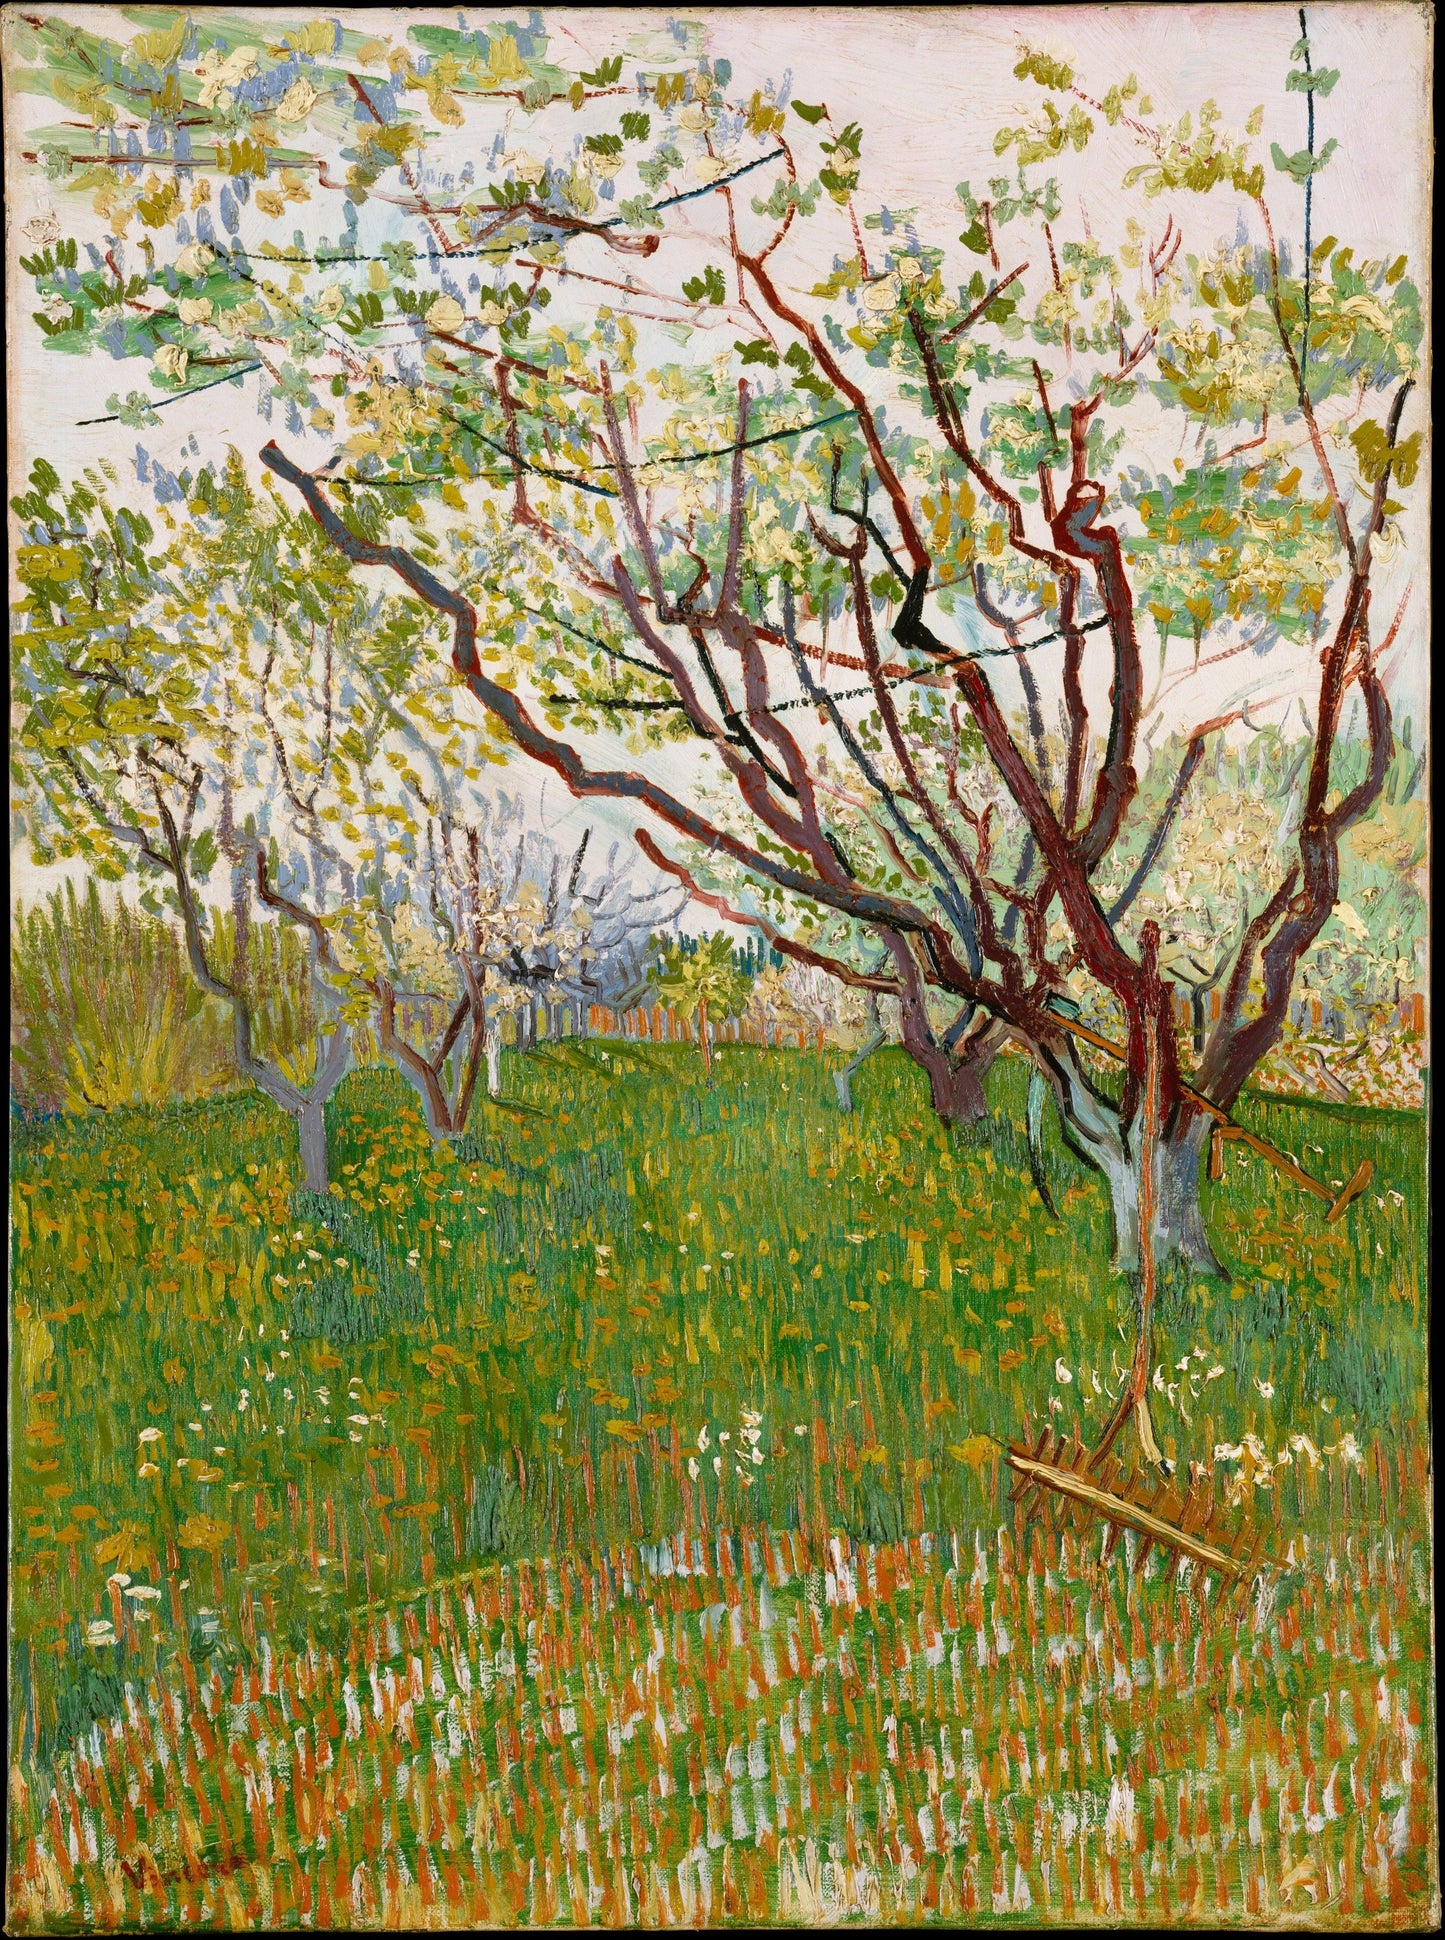 Orchard in Bloom, 1888